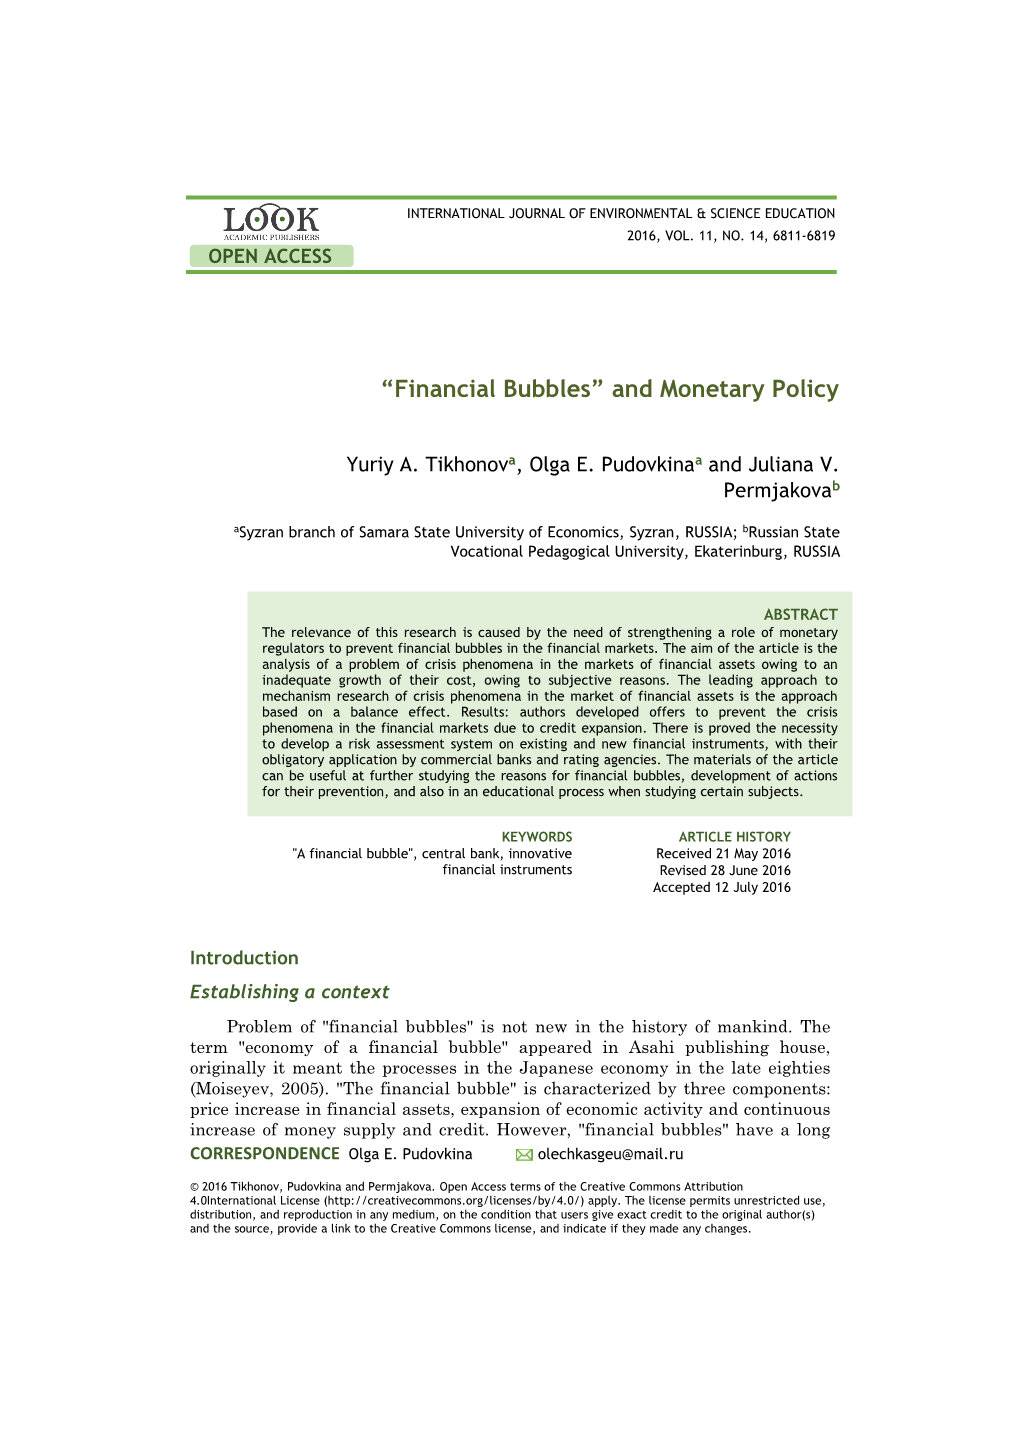 “Financial Bubbles” and Monetary Policy